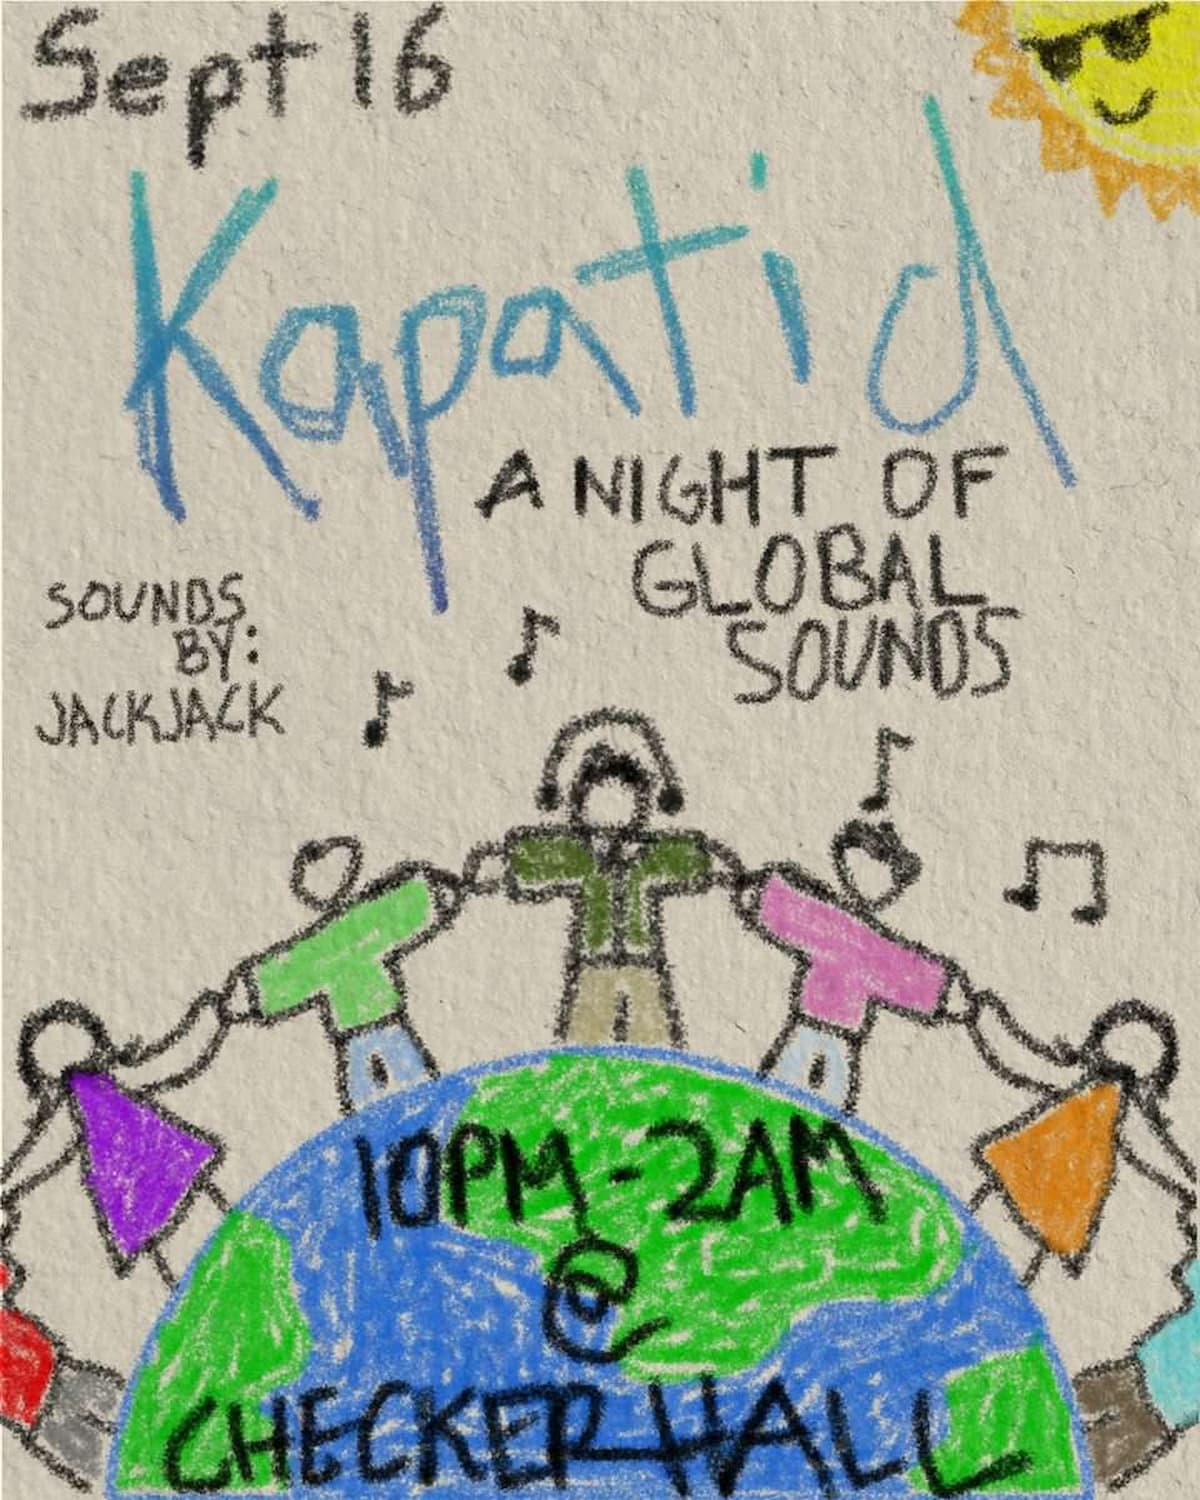 Kaptid - A Night of Global Sounds